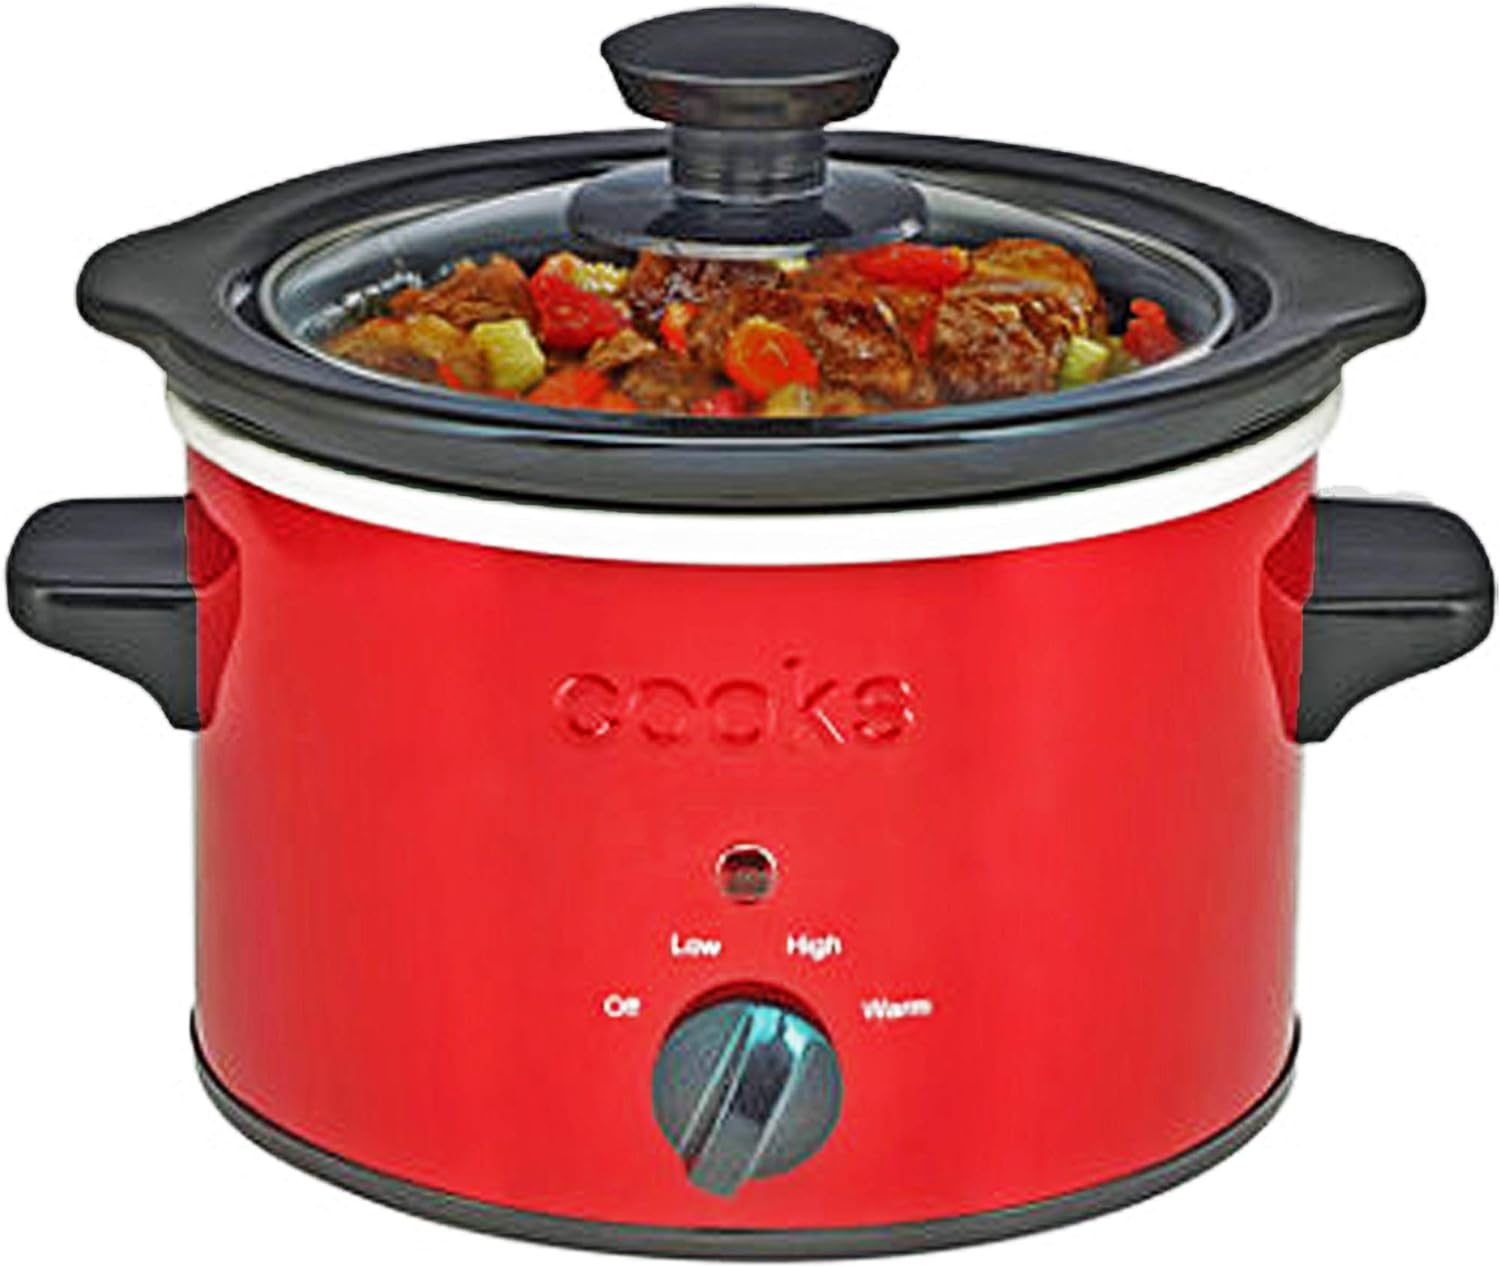 Cooks by JCP Home 1.5 Quart Slow Cooker by Cooks